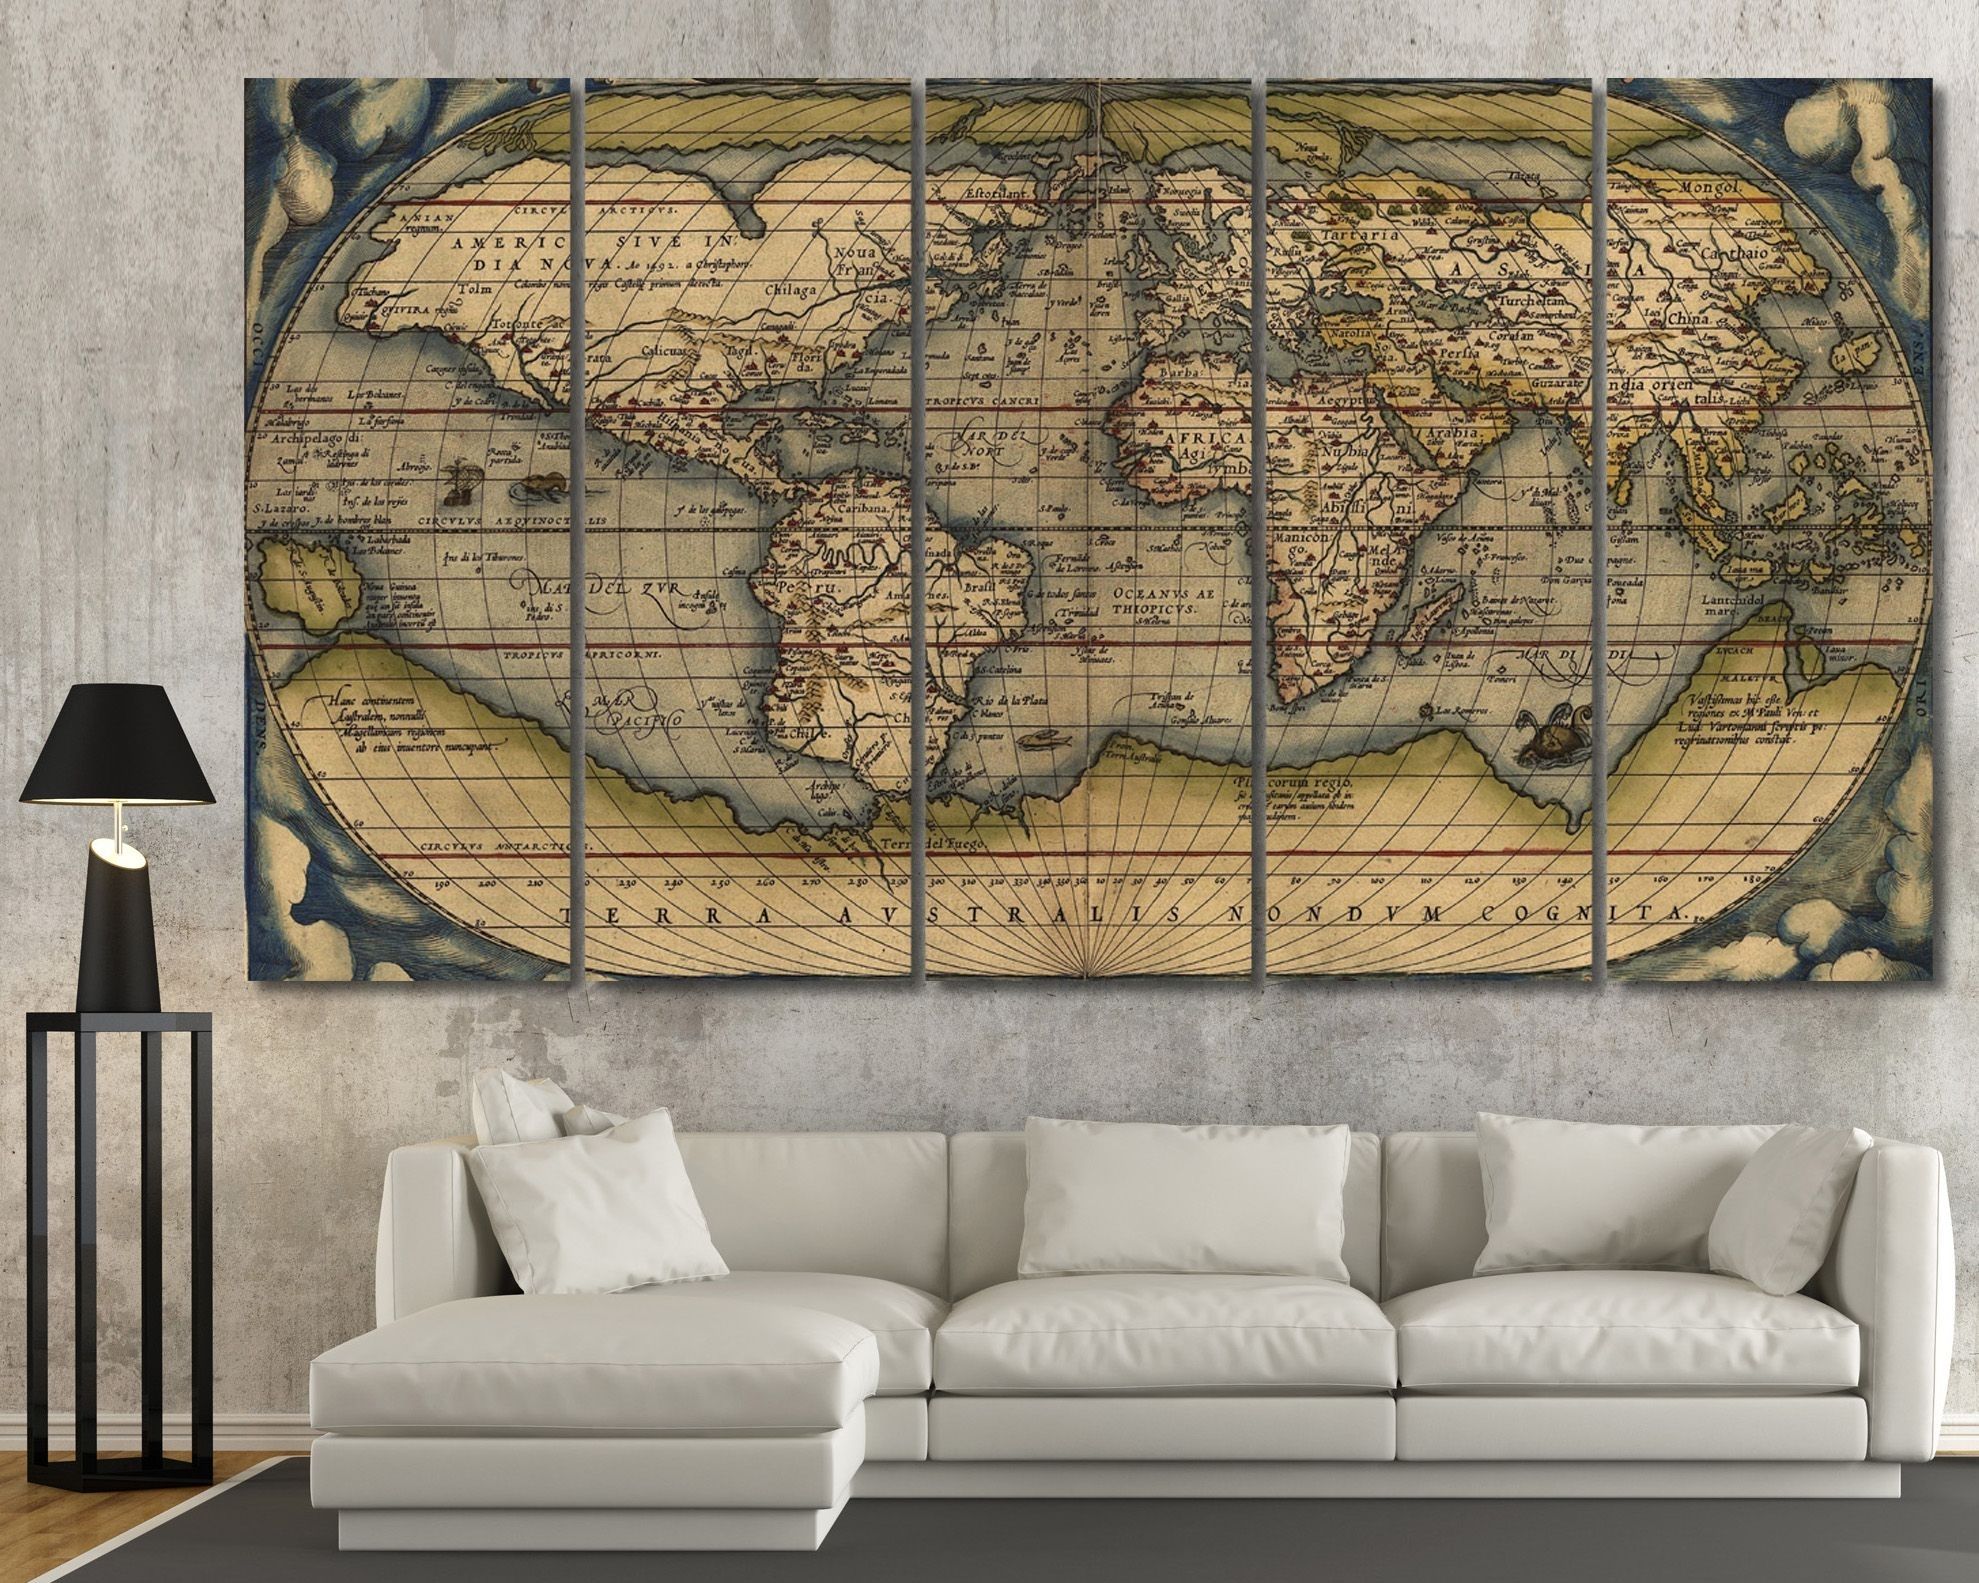 Large Vintage Wall Art Old World Map At Texelprintart | Art With Vintage Wall Art (Photo 3 of 20)